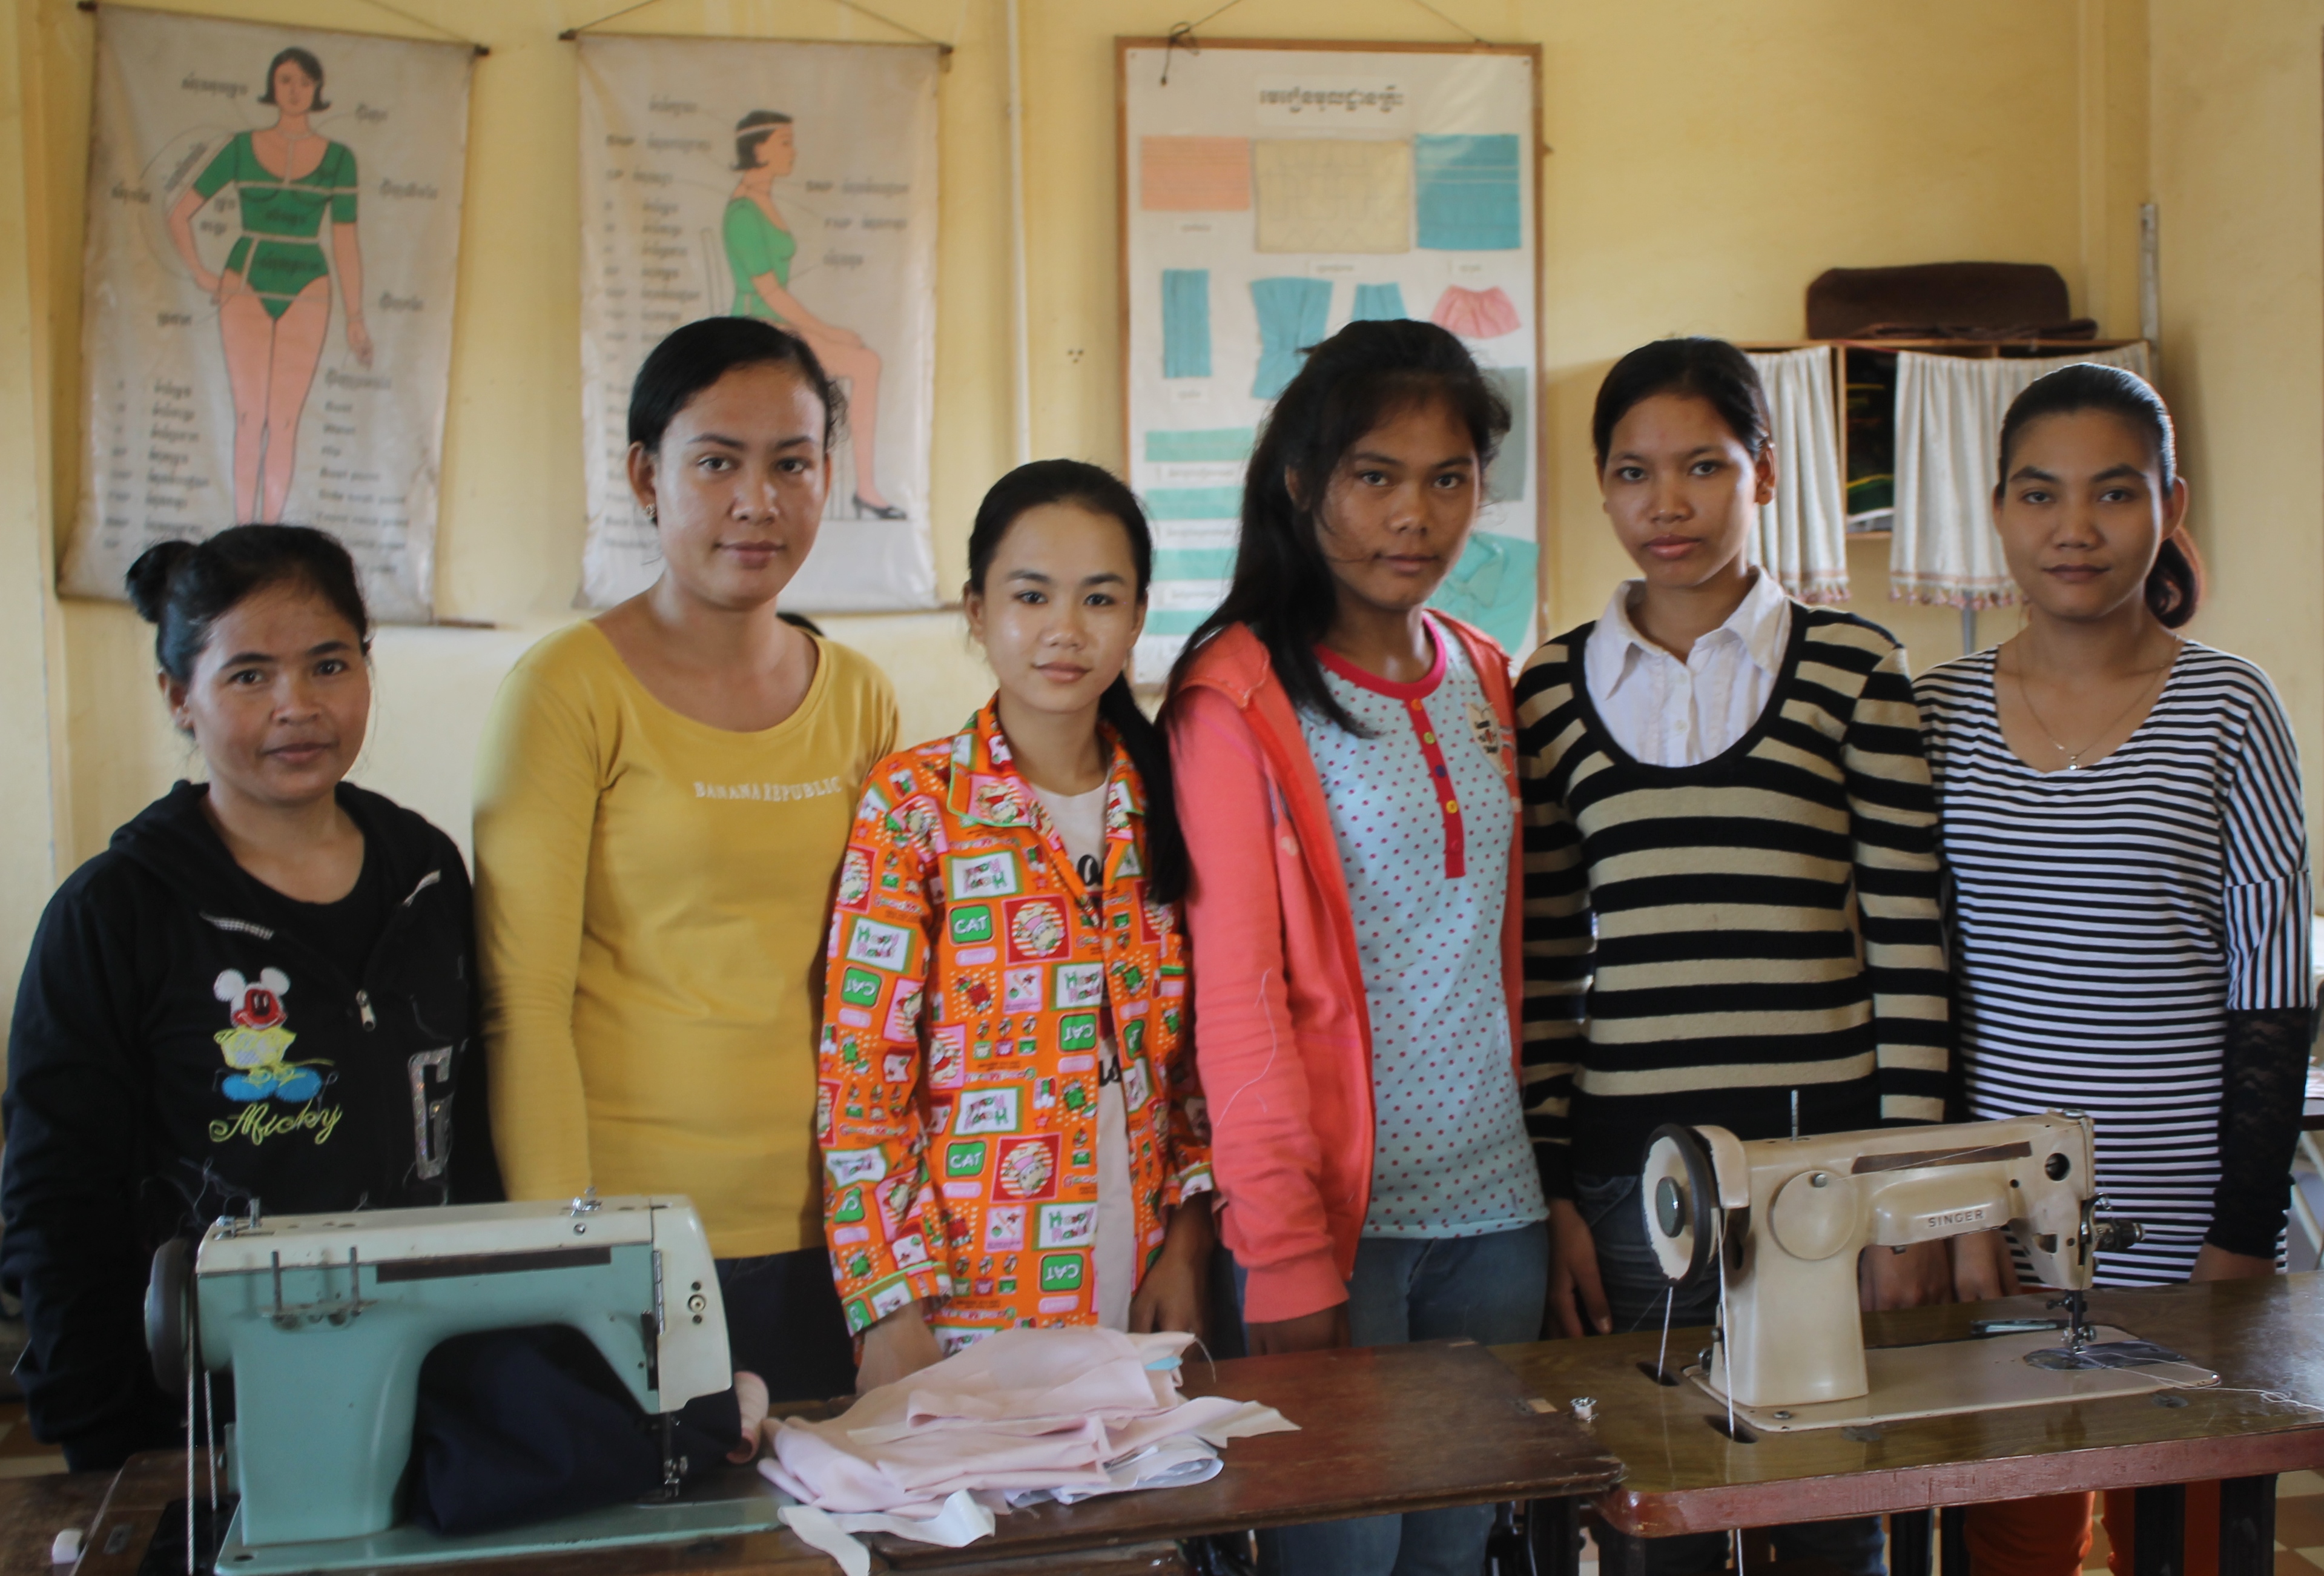 From left to right, our four new tailoring students with two previous students that now work at the training center.